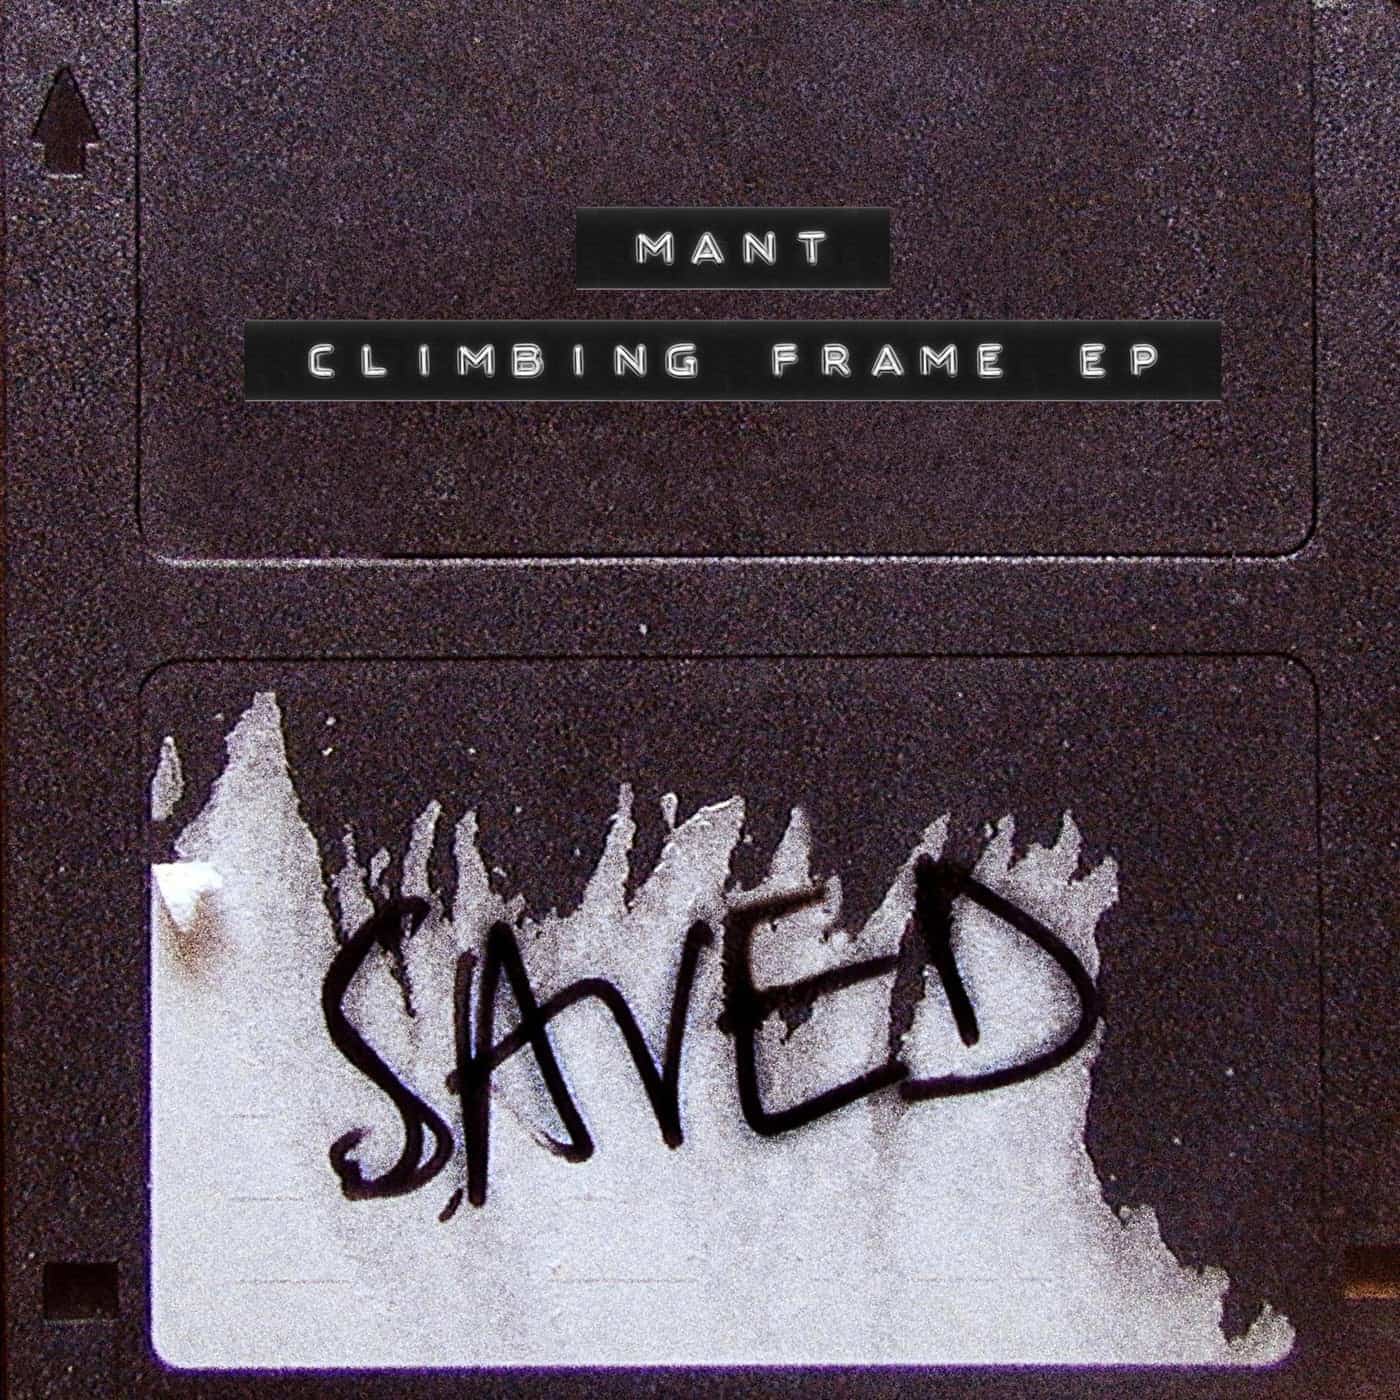 image cover: MANT - Climbing Frame EP / SAVED26501Z